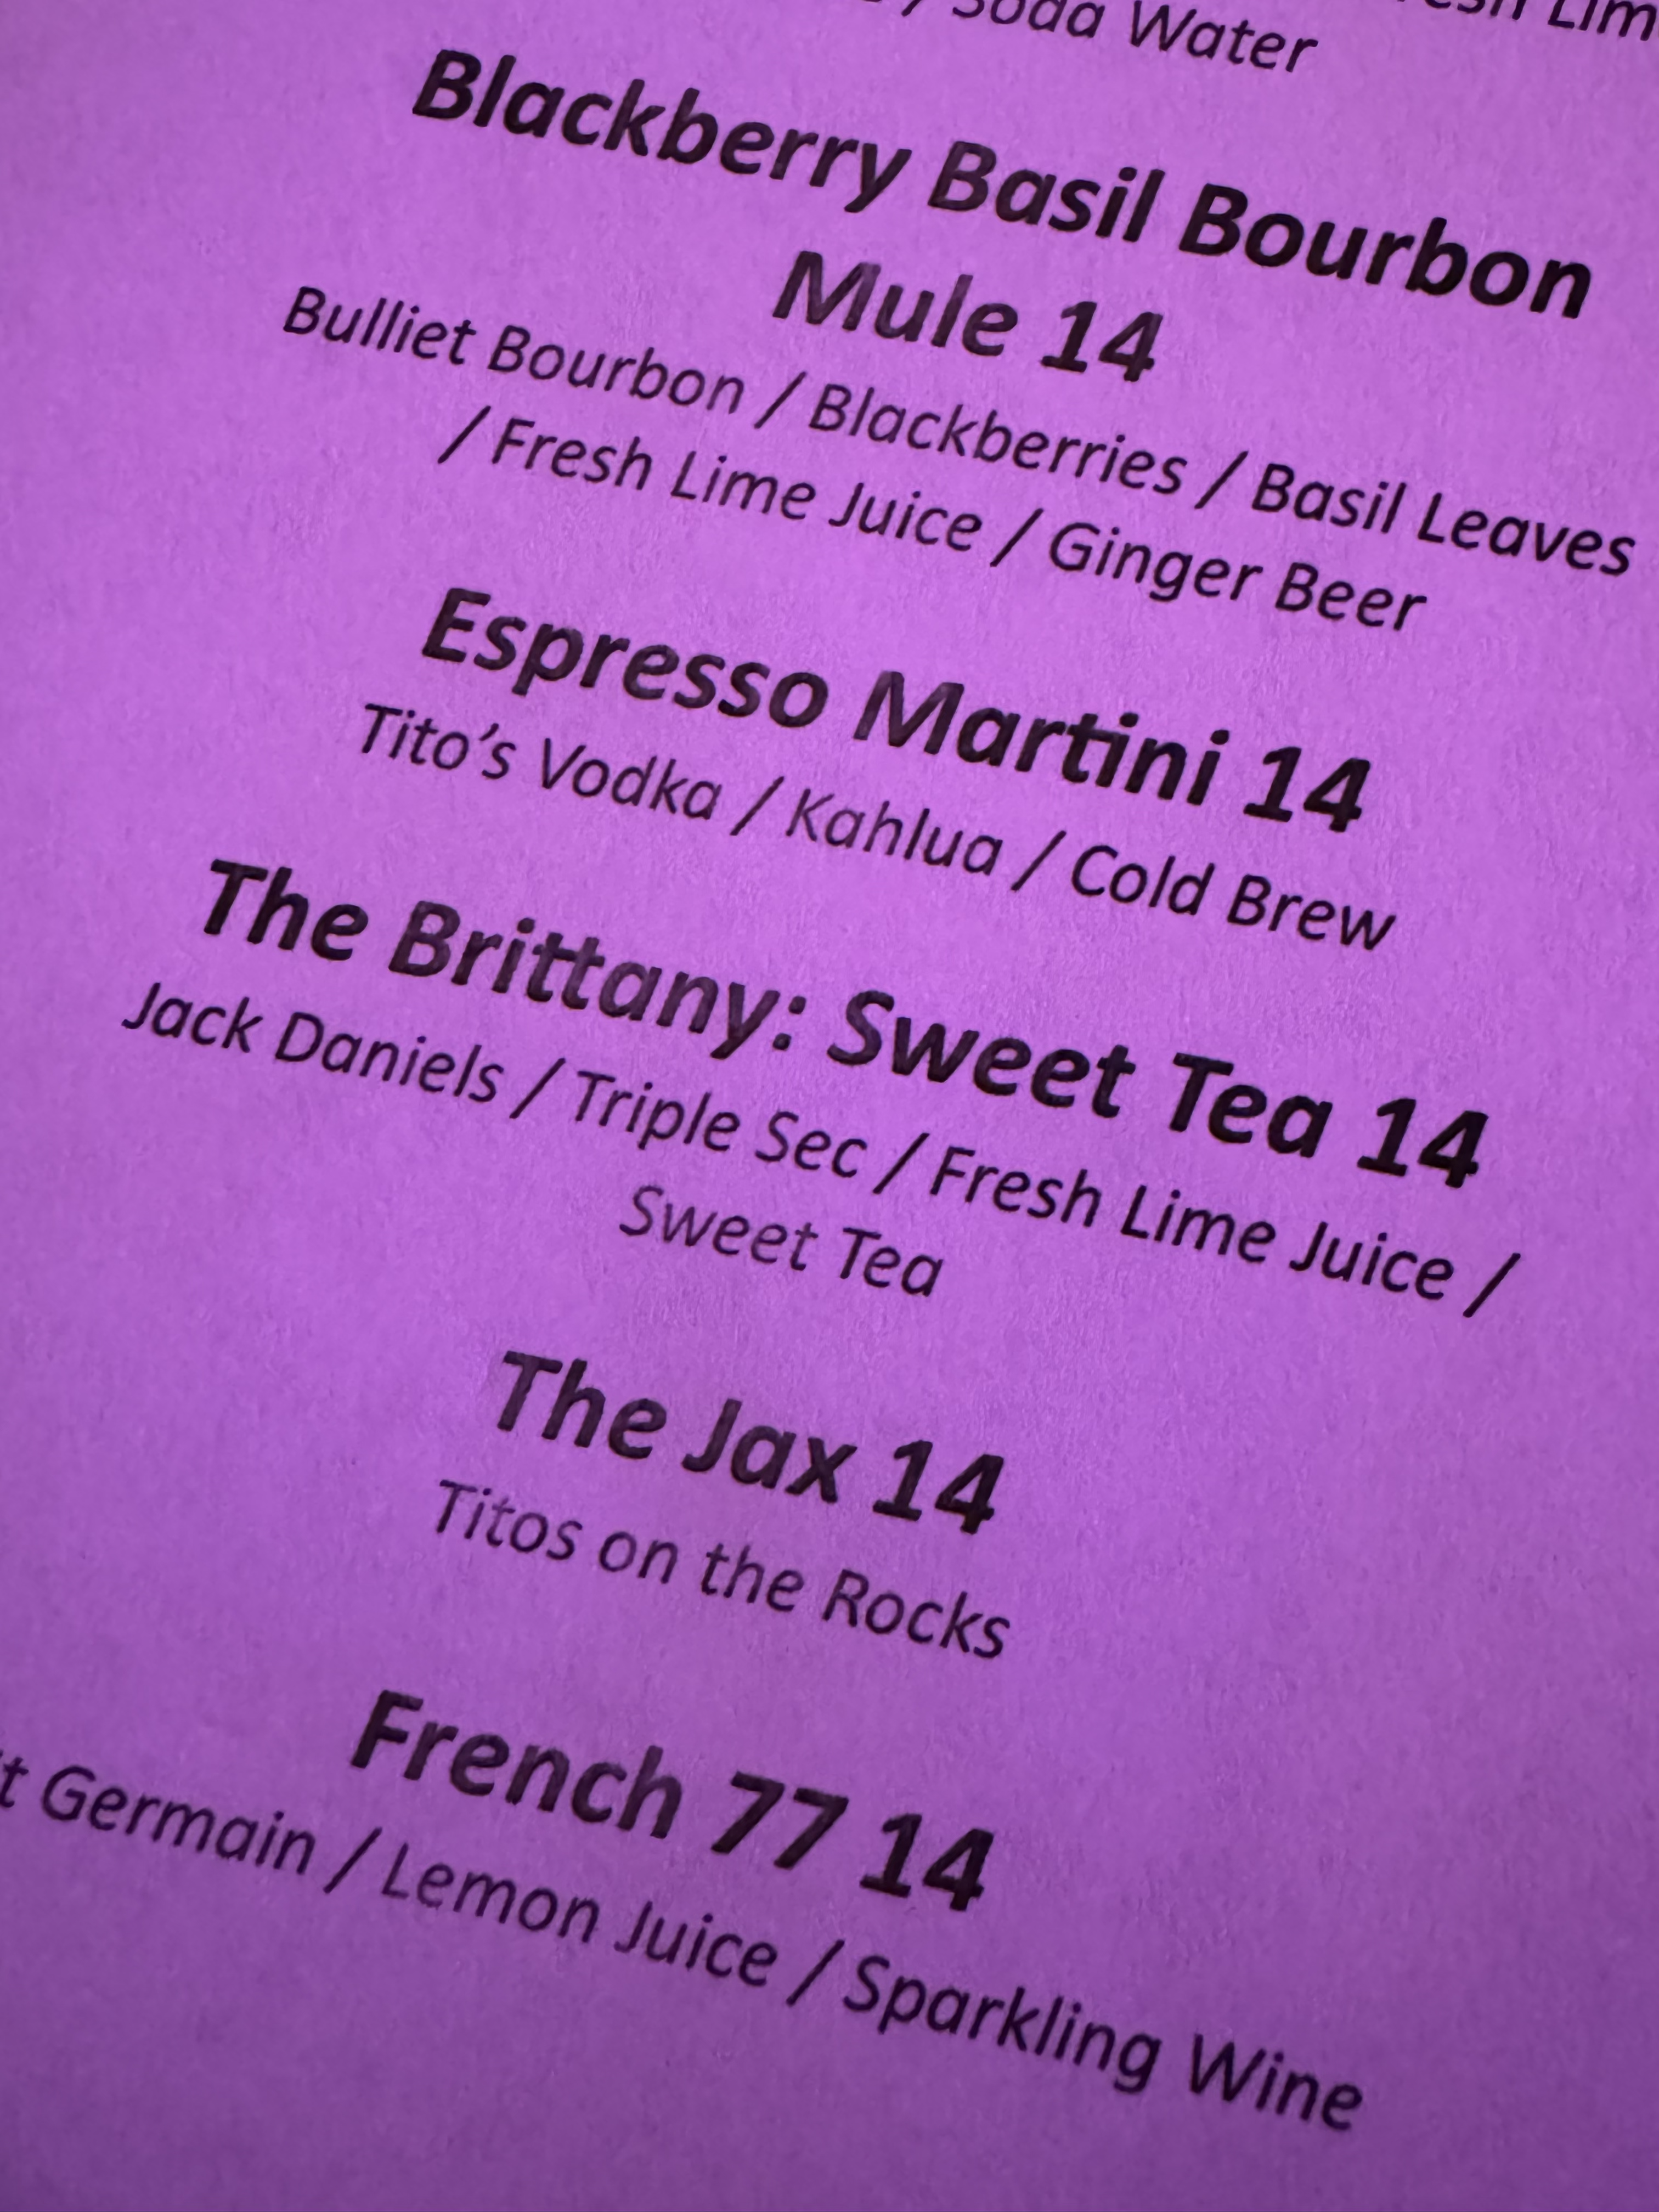 A close-up of a menu displaying a selection of drinks including Bourbon Basil Bourbon, Espresso Martini, The Britney, and French 77